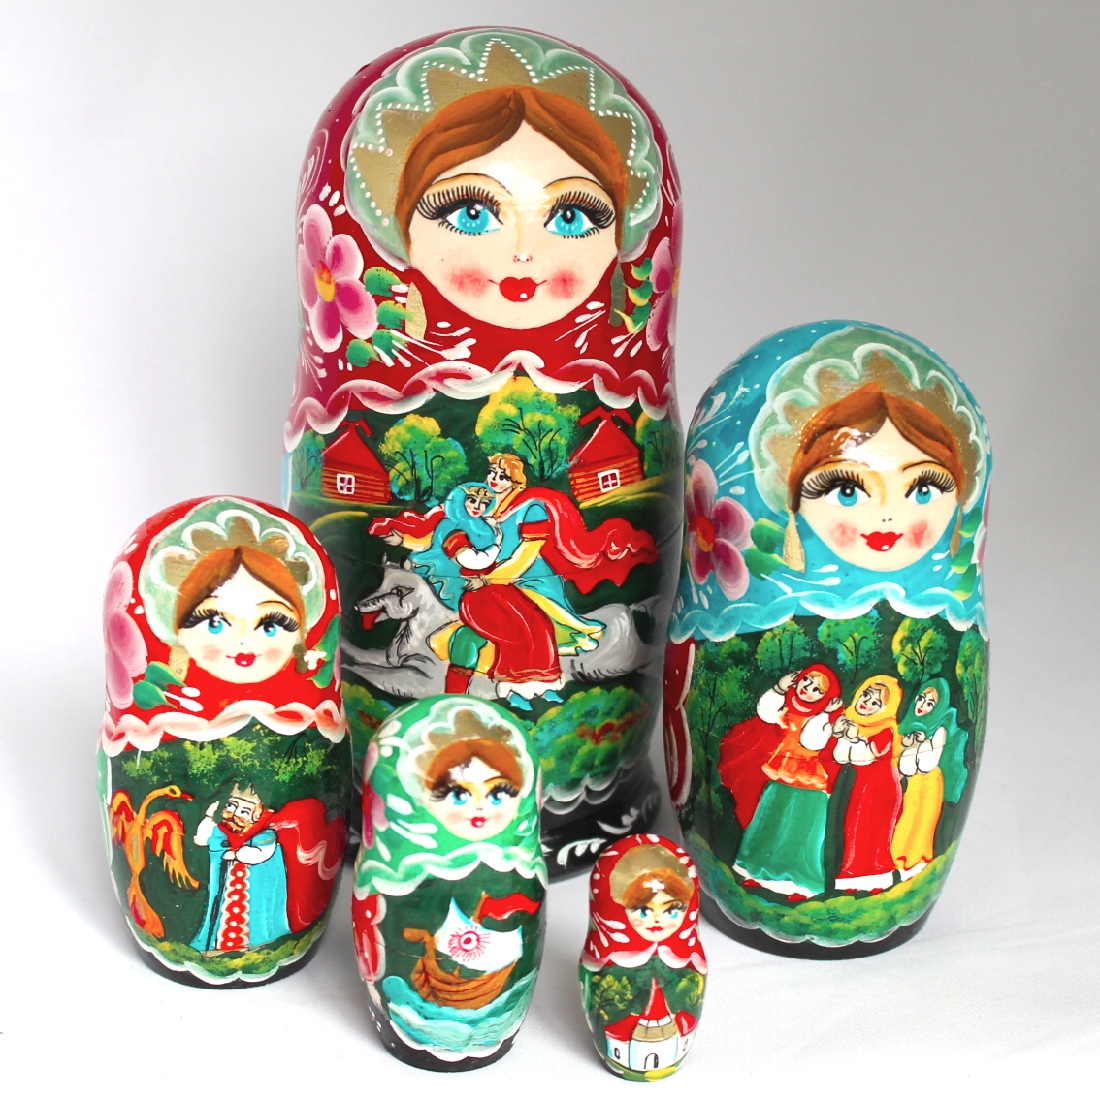 HD Quality Wallpaper | Collection: Man Made, 1100x1099 Nesting Doll